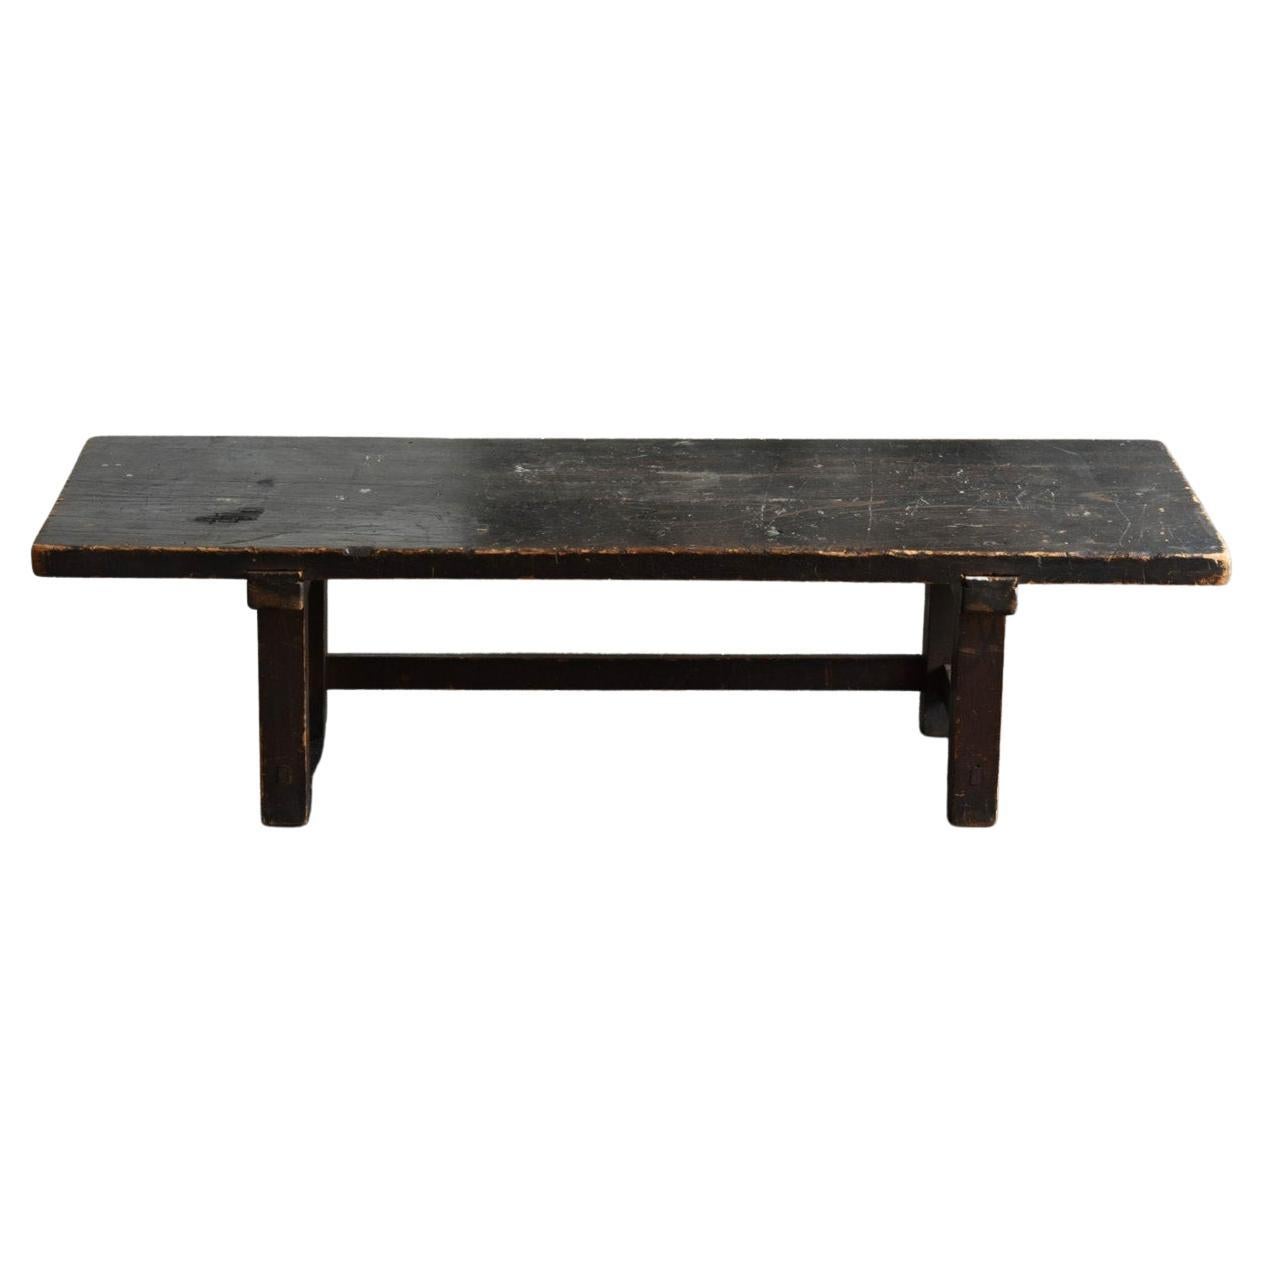 Japanese Antique Wooden Low Table/1800-1900/Edo-Meiji Period/Simple Sofa Table